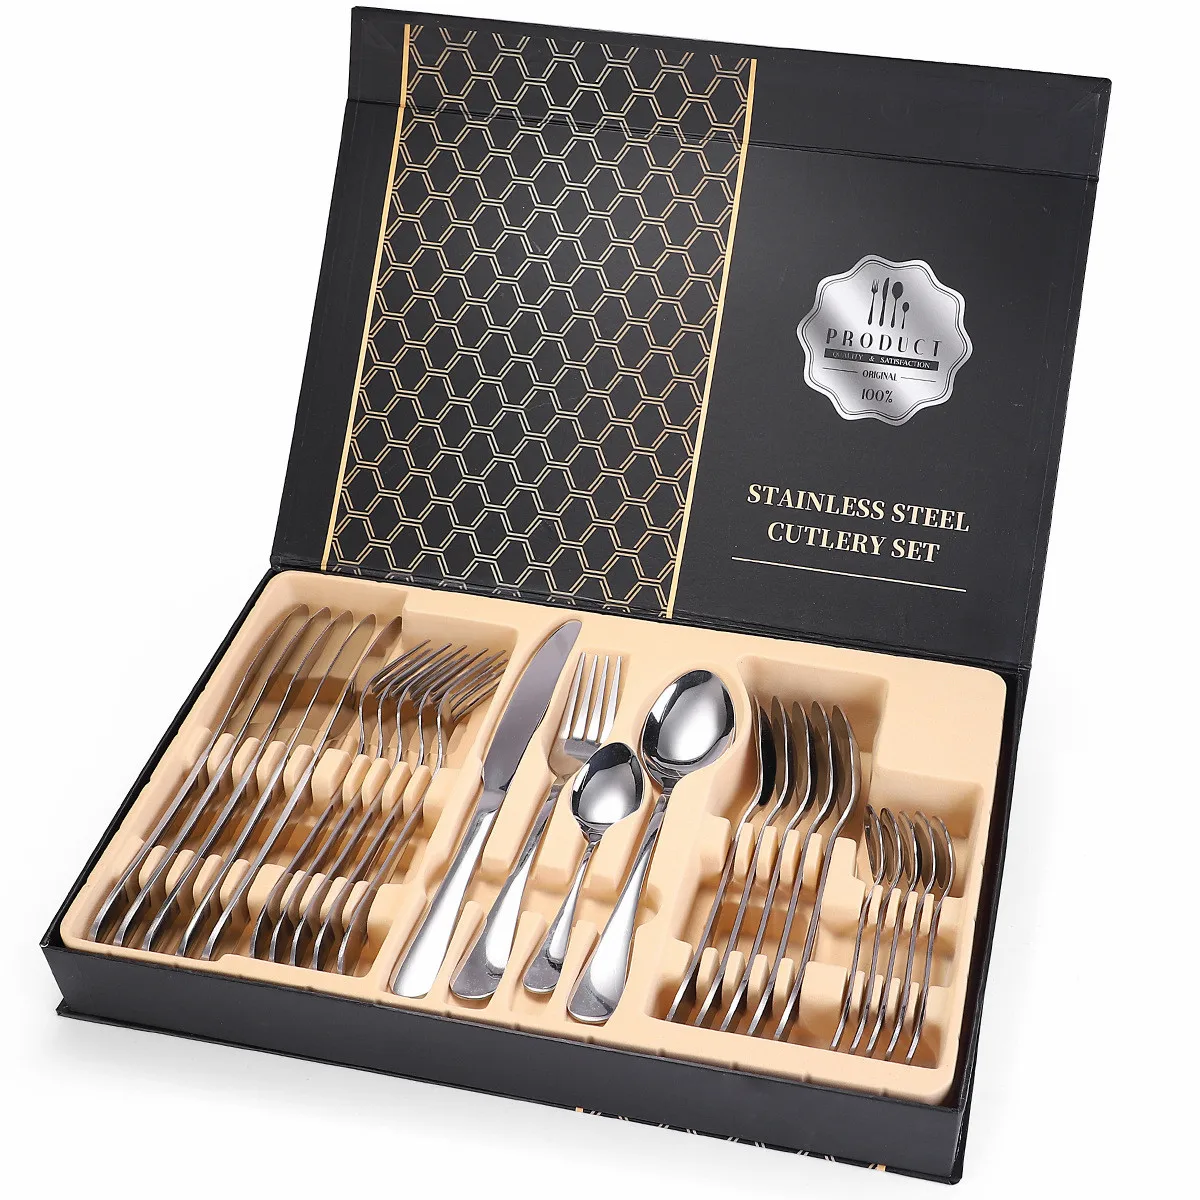 Gold Tableware Stainless Steel Cutlery Fork Spoons Knives Set Gold Cutlery Set Table Cutlery 24 Pieces with Case Dropshipping